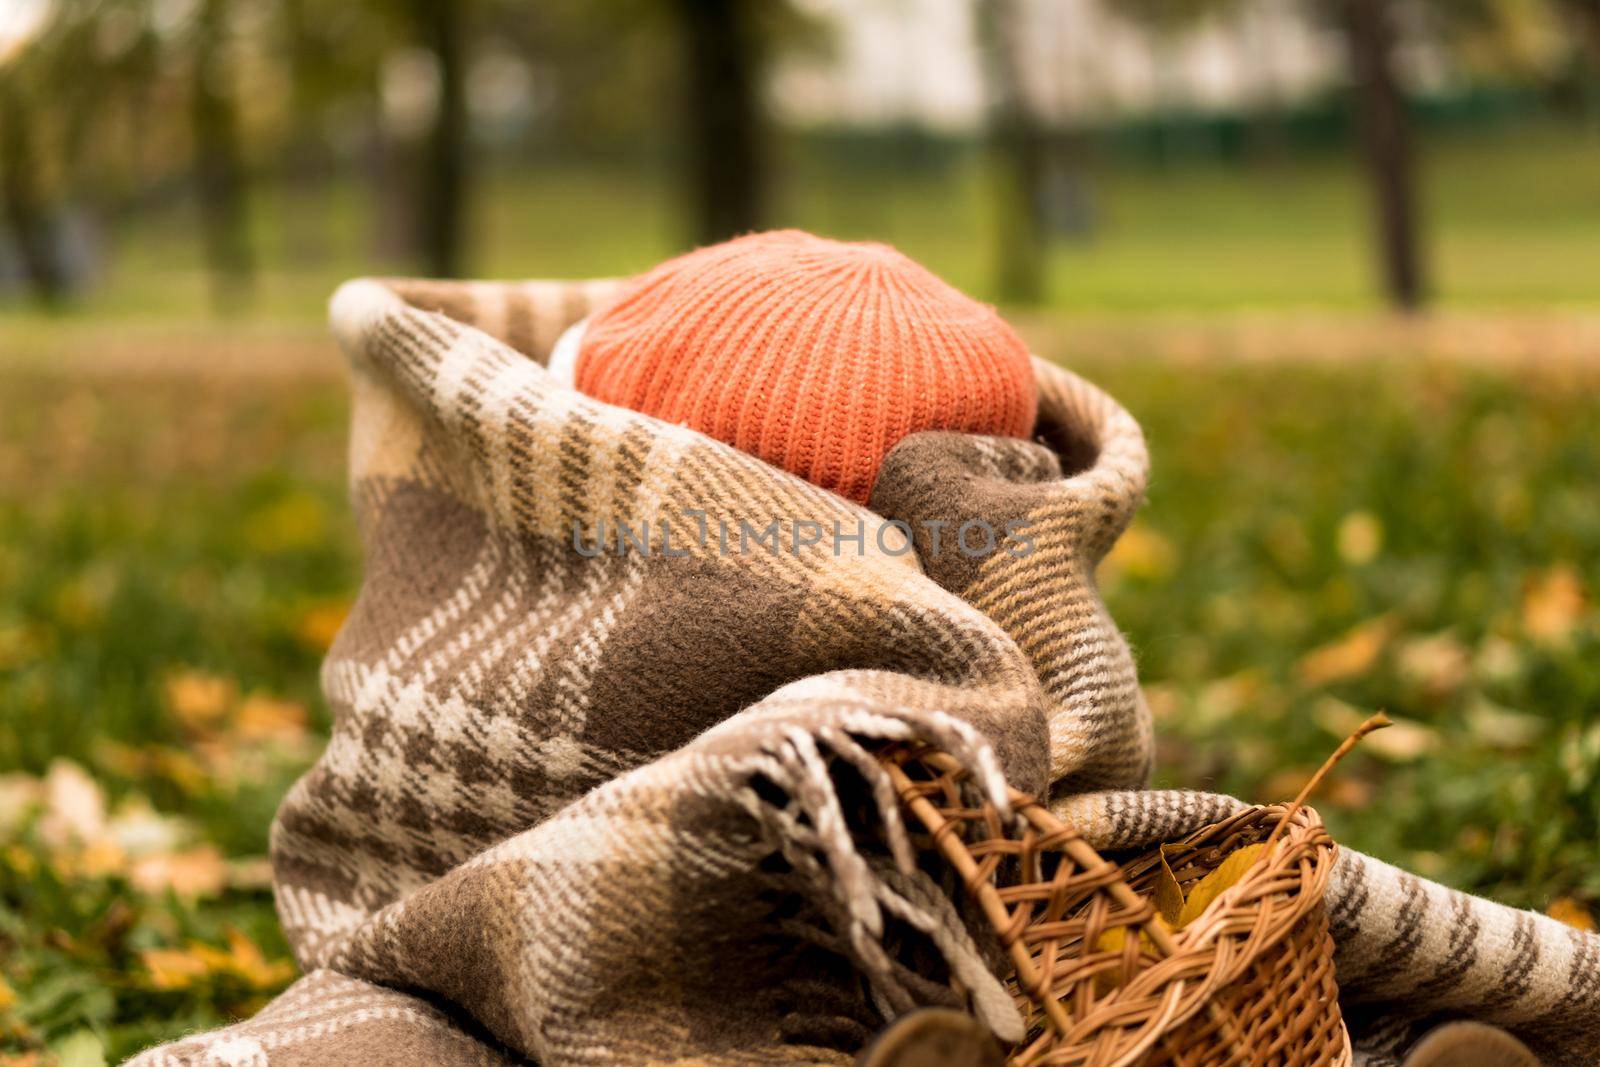 Little Cute Preschool Minor Baby Girl In Orange Beret Wrapped Up With Head In Plaid At Yellow Fallen Leaves On Basket Hid From Cold Weather In Fall Park. Childhood, Family, Motherhood, Autumn Concept by mytrykau